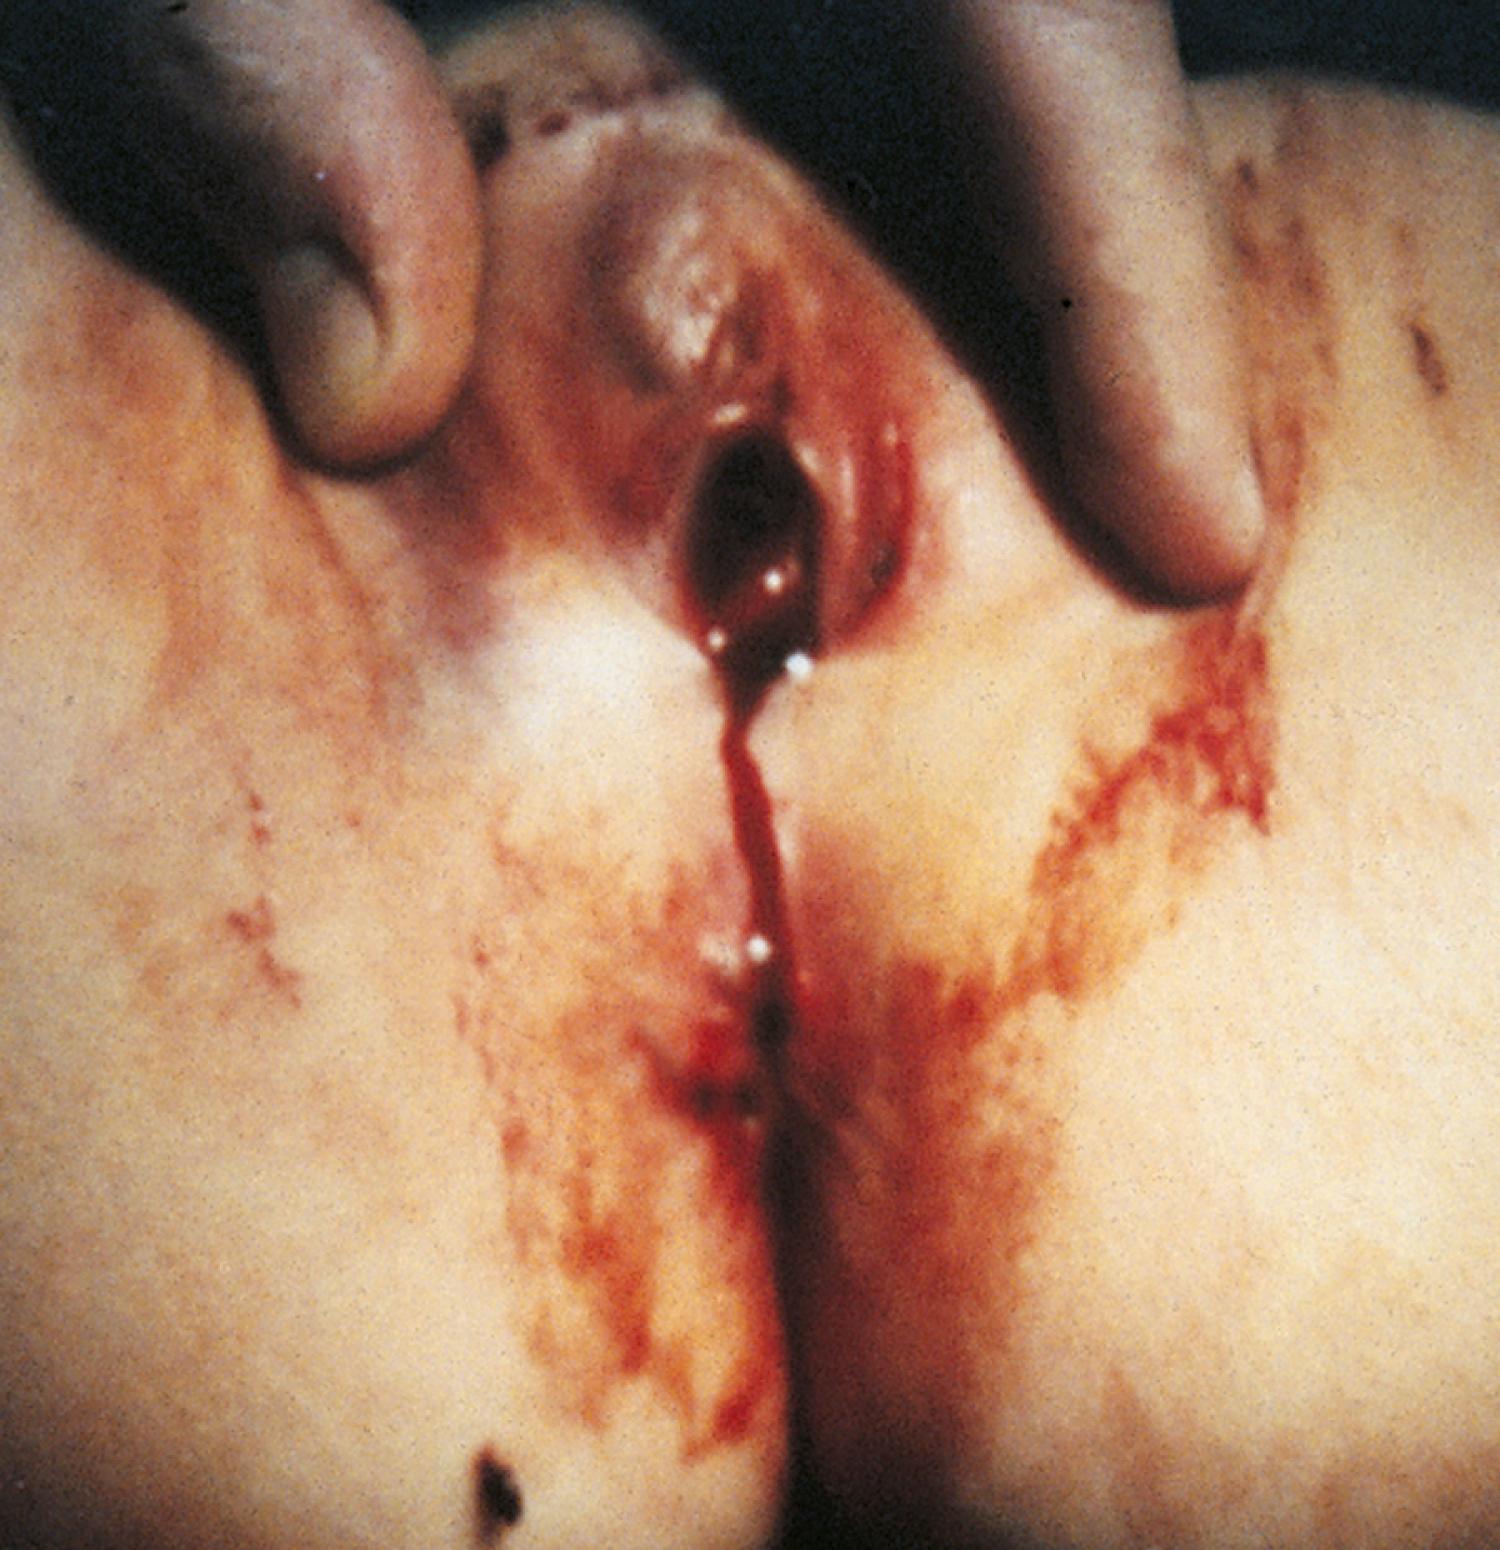 Fig. 19.16, Moderate genital trauma. After a straddle injury on a diving board, this 9-year-old girl had vaginal bleeding. Inspection disclosed a hematoma of the anterior portion of the right labia majora, contusions of the clitoris and anterior labia minora, and a hematoma protruding through the vaginal opening. A small superficial laceration is present on the left, between the labia majora and minora. At vaginoscopy under anesthesia a vaginal tear involving the right lateral wall was found.